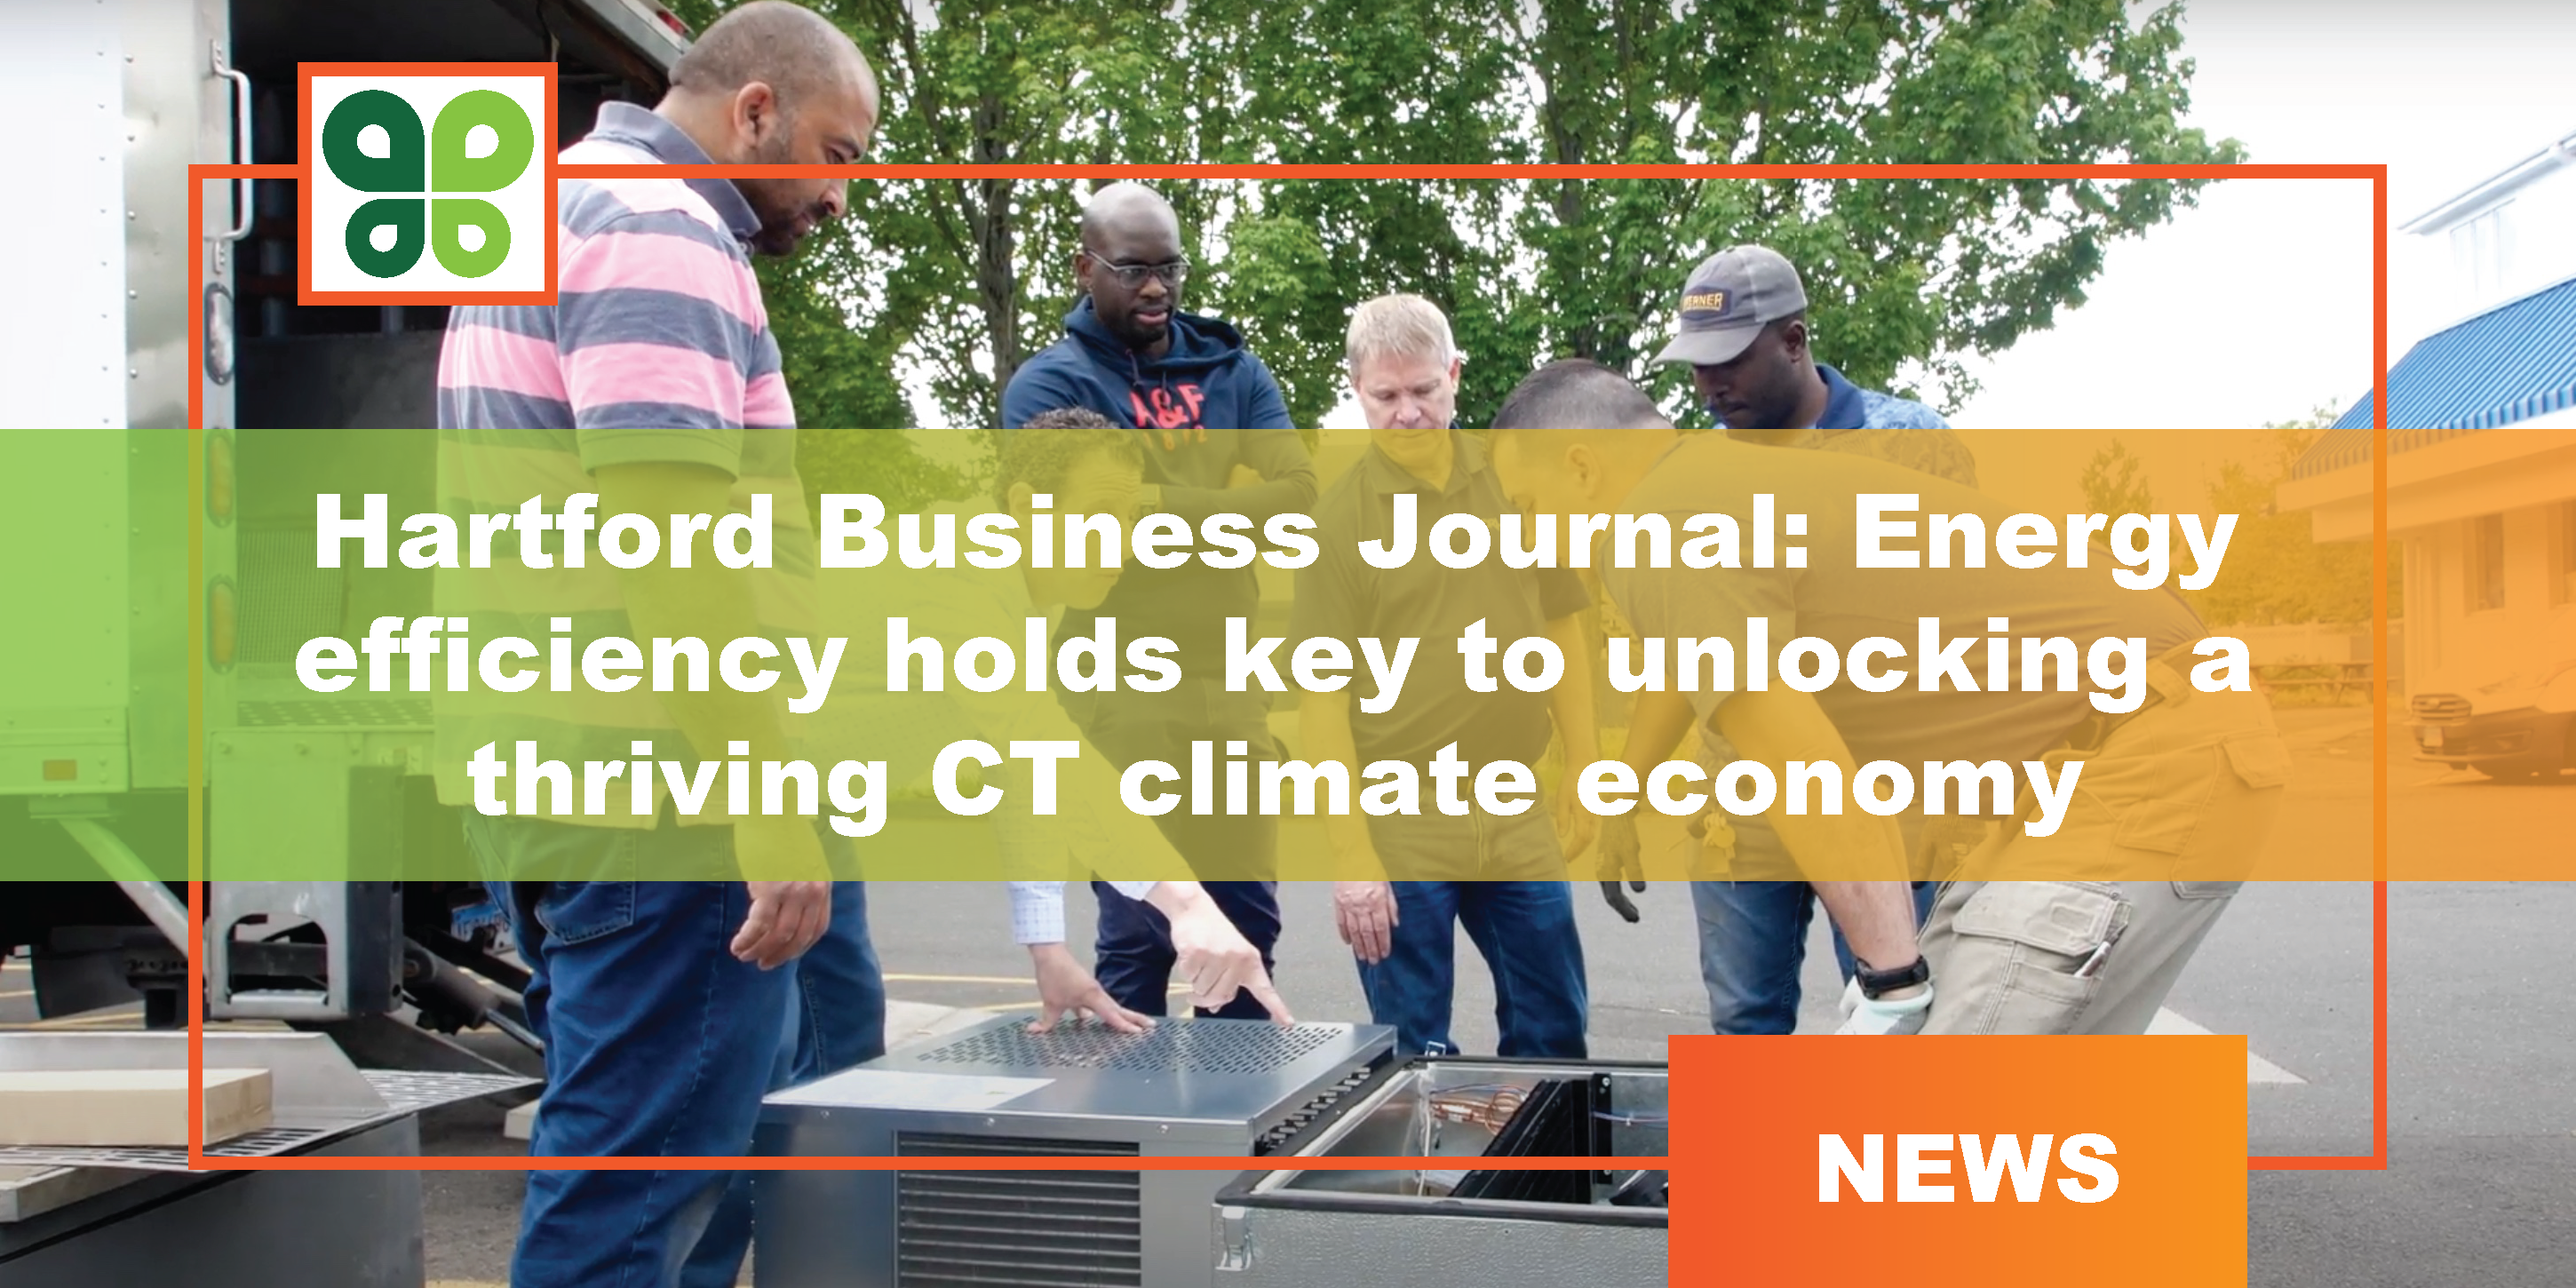 Hartford Business Journal: Energy efficiency holds key to unlocking a thriving CT climate economy